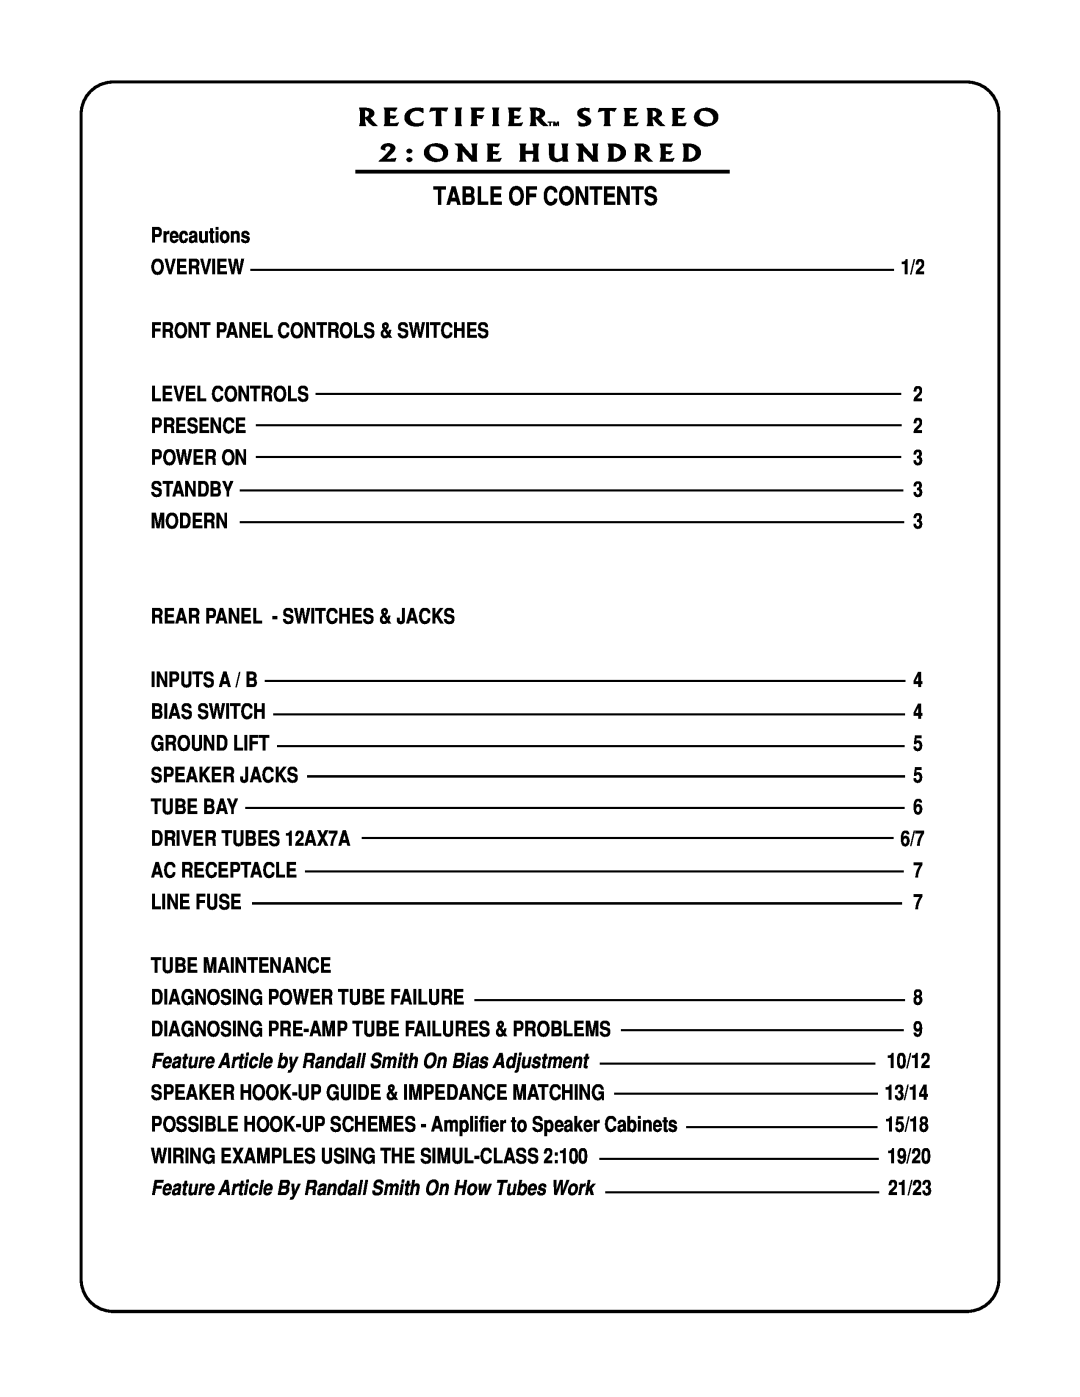 Mesa/Boogie Rectifier Stereo owner manual Table Of Contents 